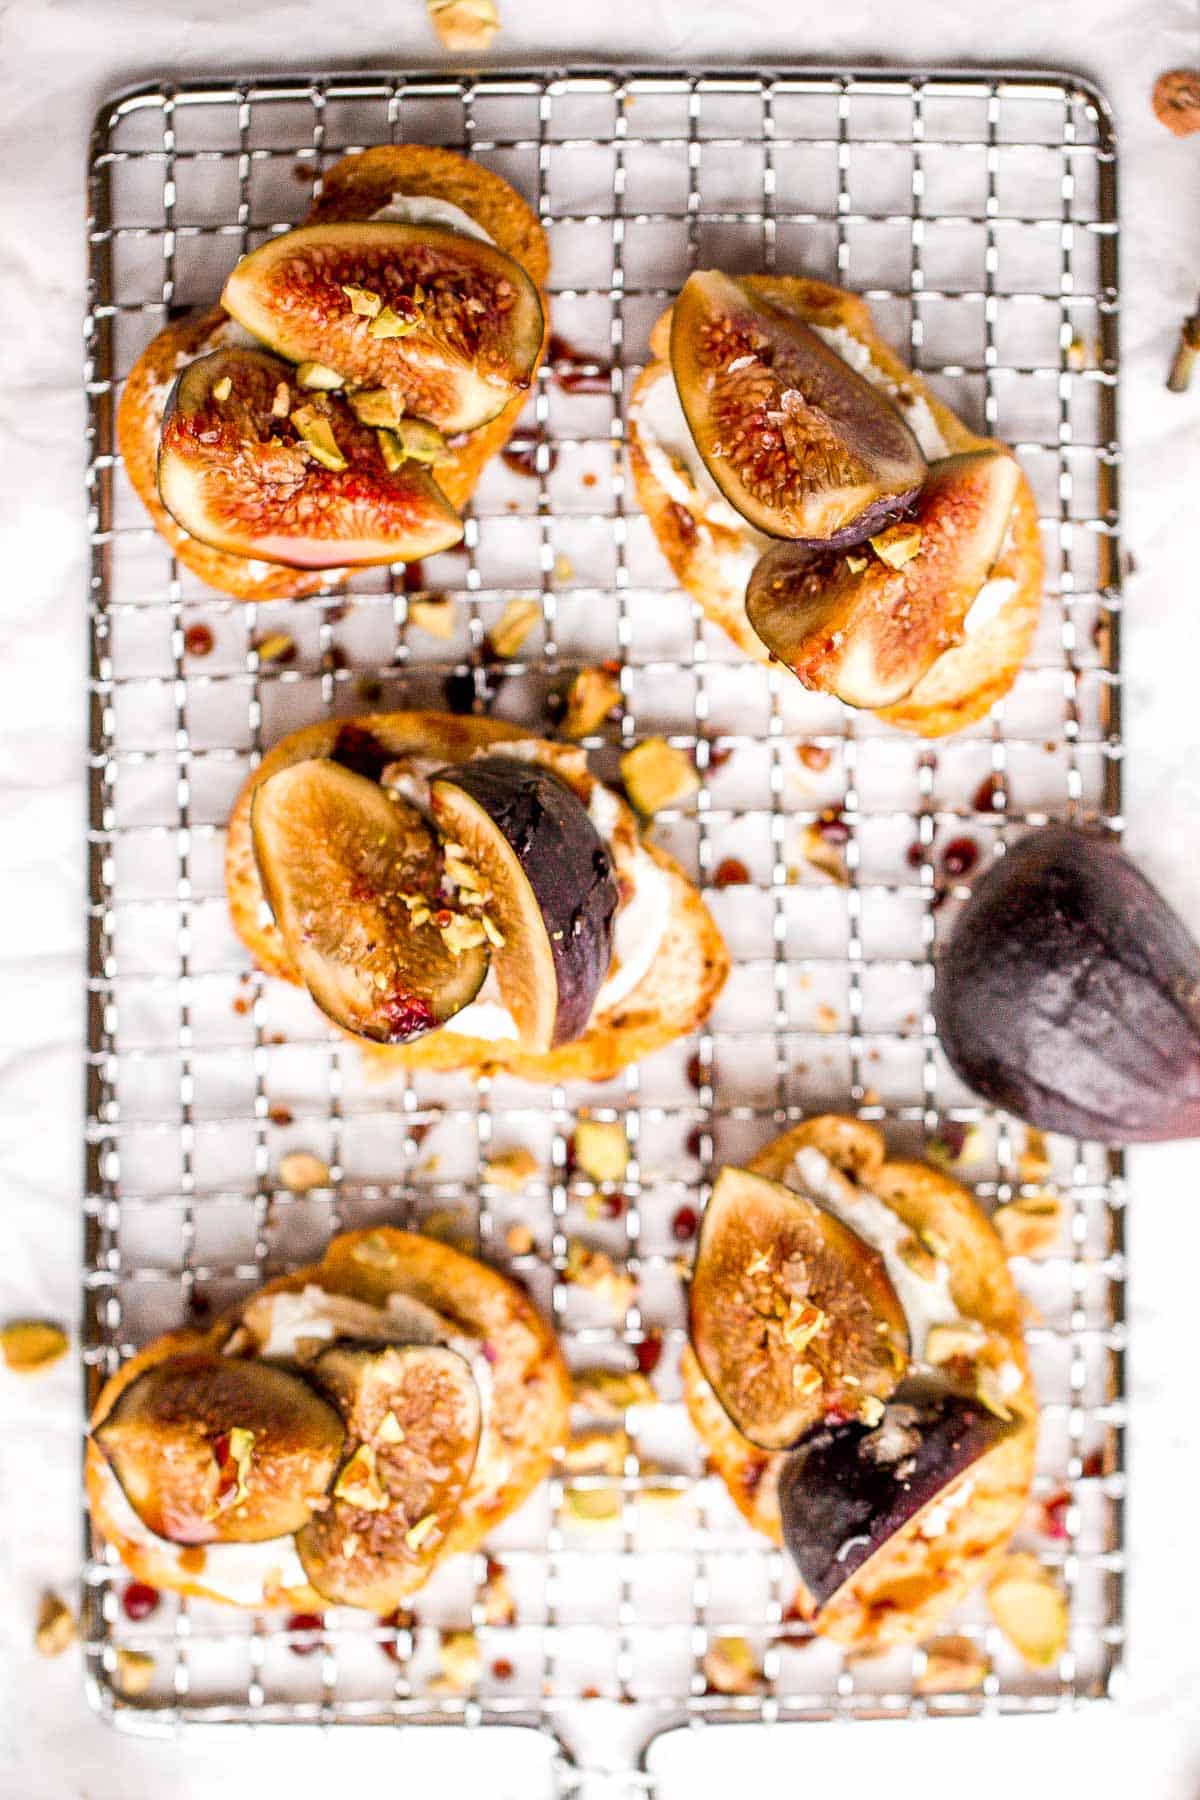 Fig crostini topped sweet, juicy figs, tangy goat cheese and crunchy pistachios is flavourful, delicious, and perfect for snacking on or entertaining. | aheadofthyme.com